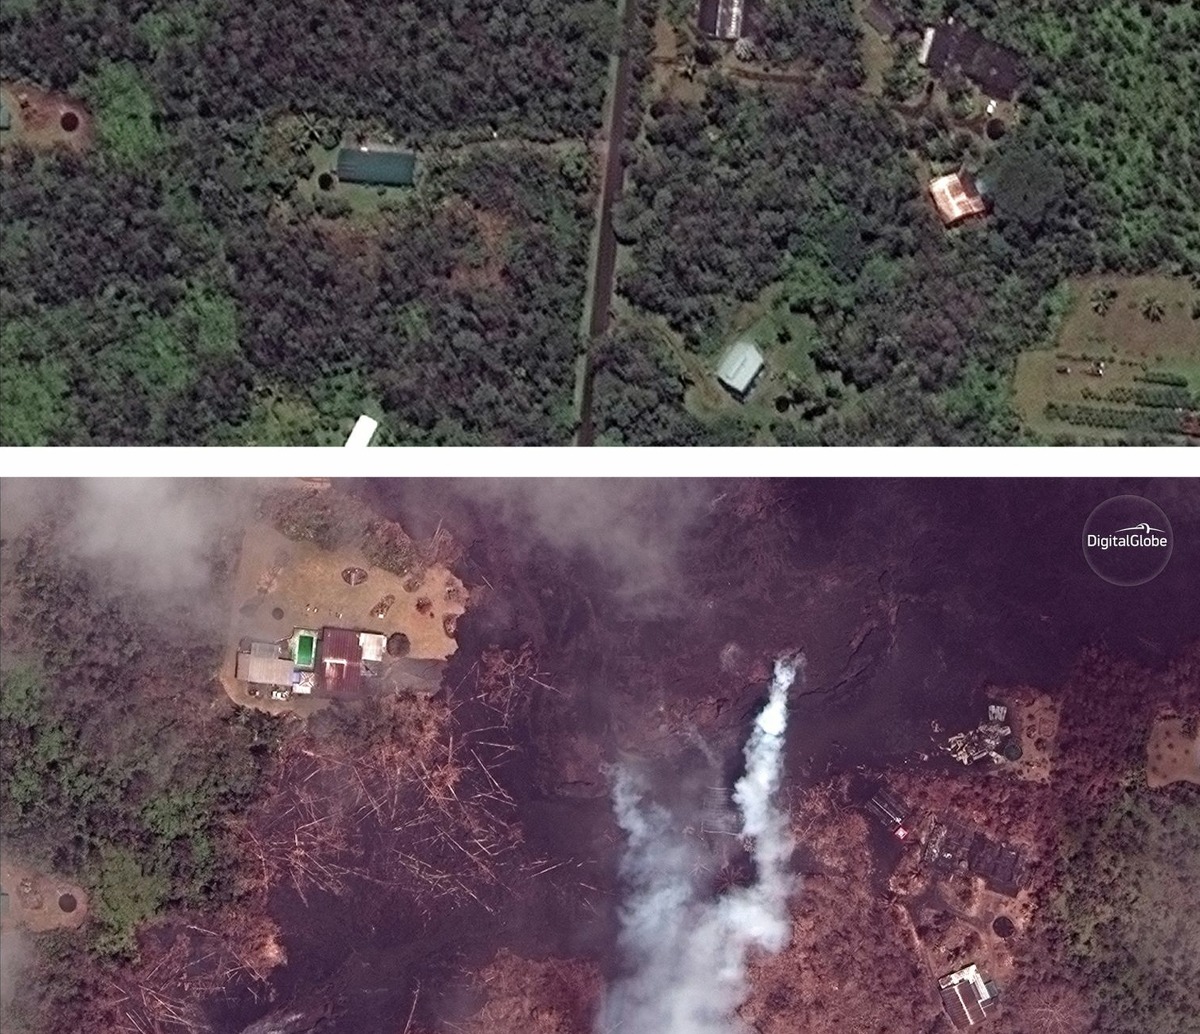 Before And After Images Show Fiery Path Of Kilauea Volcano